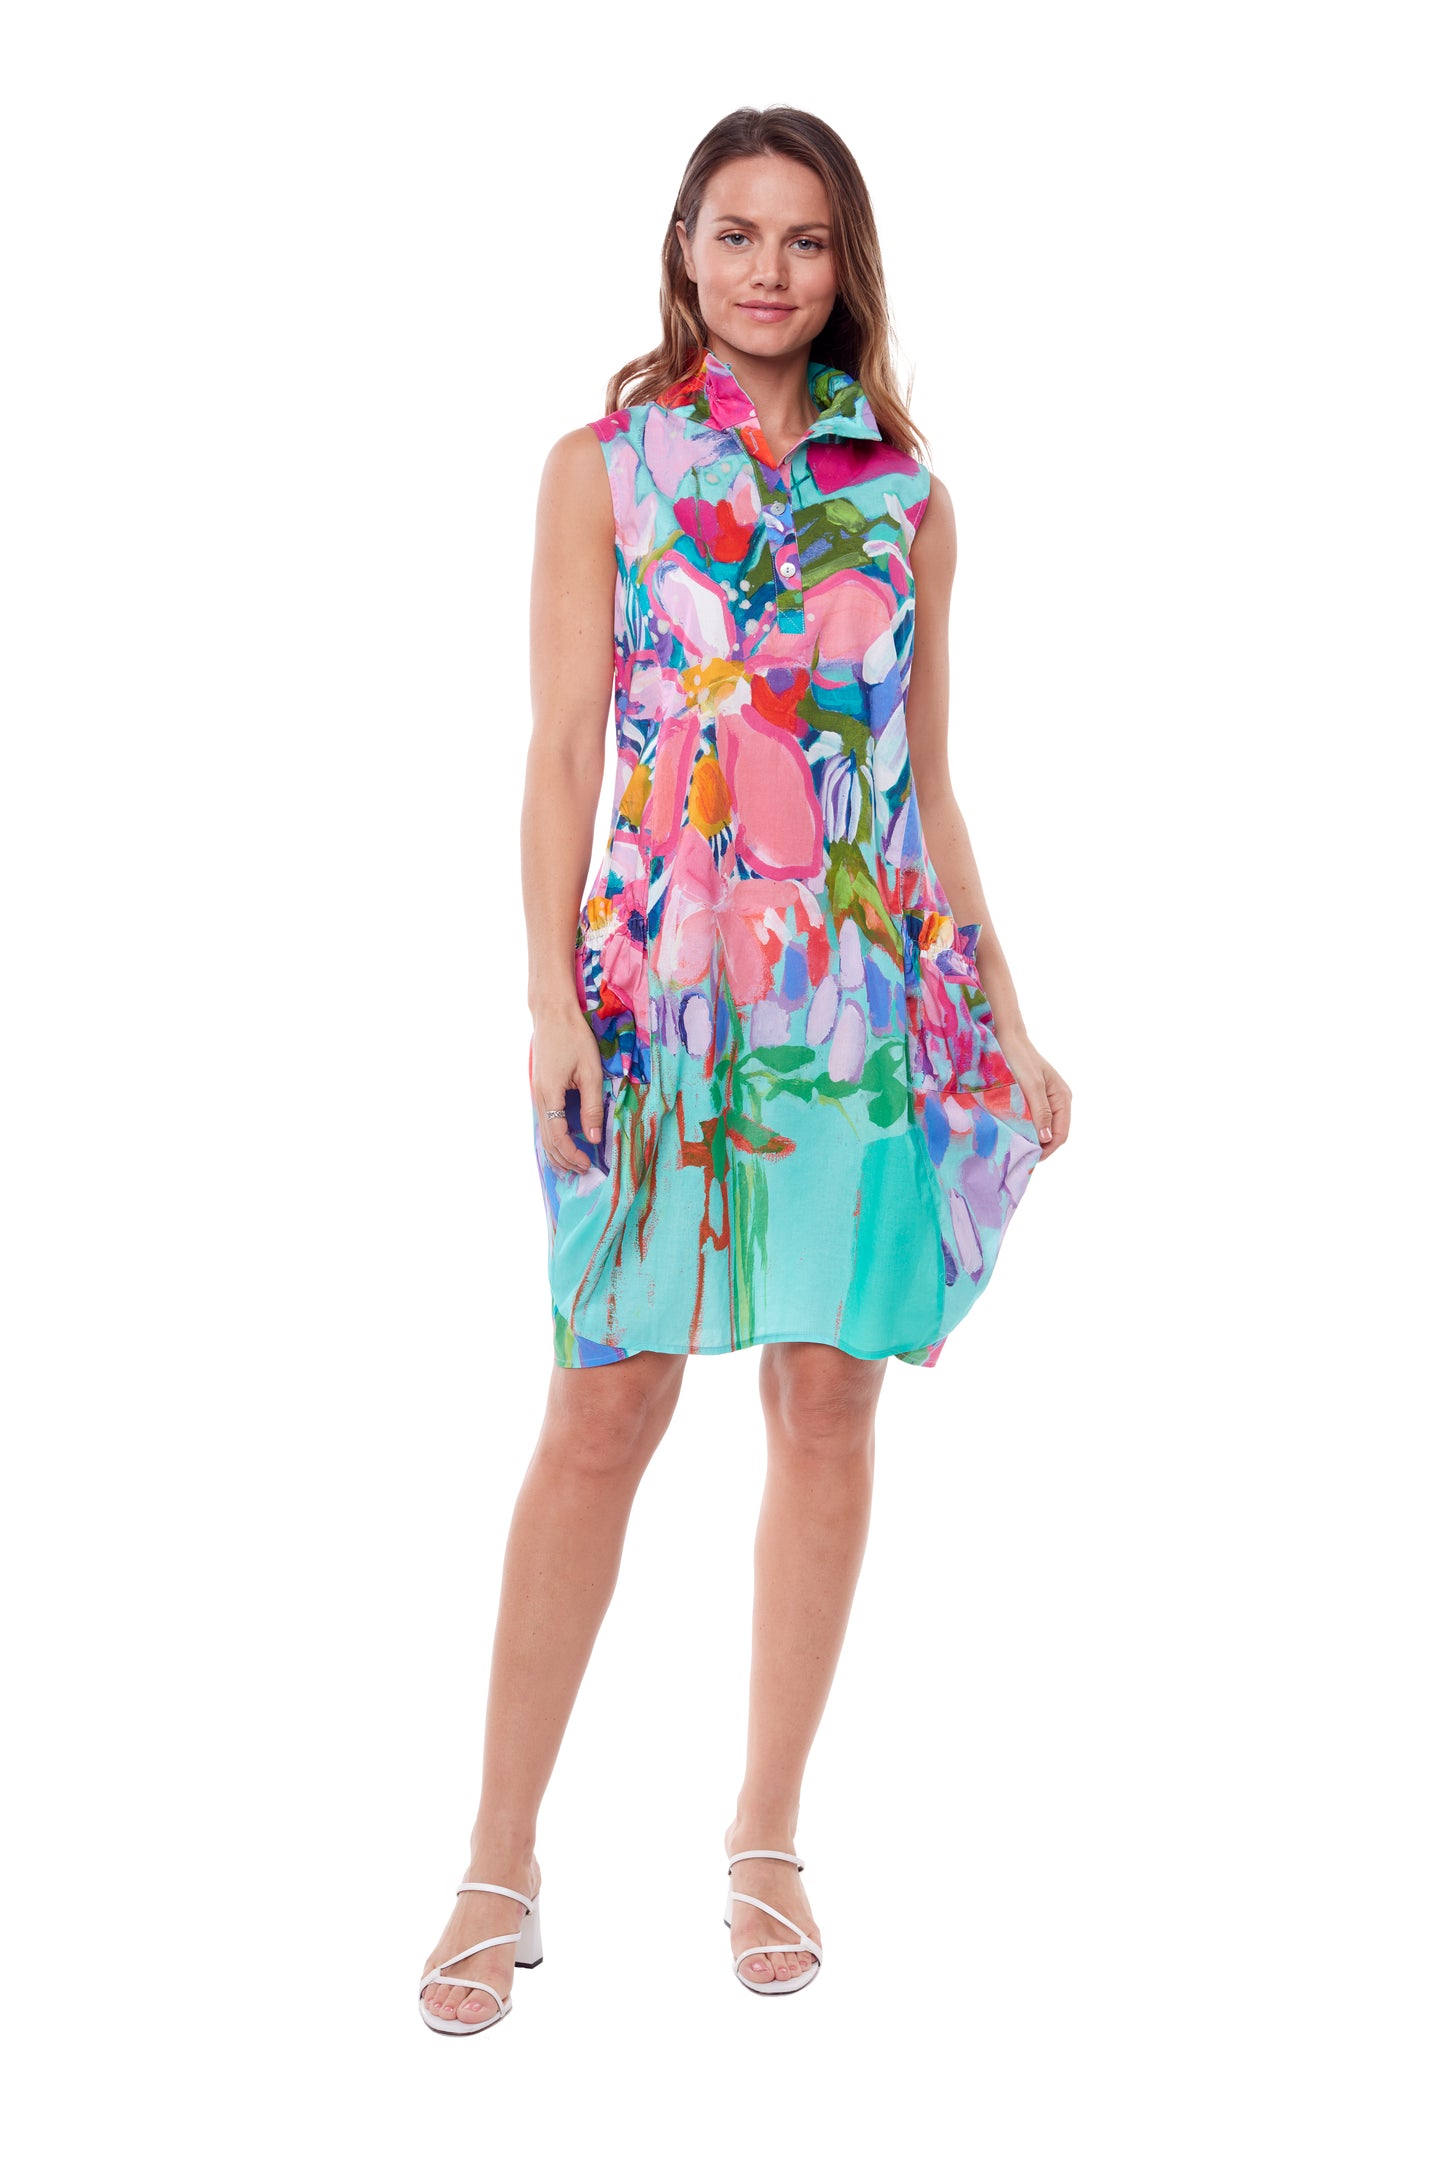 Down by the Ponds Edge sleeveless dress with frill collar